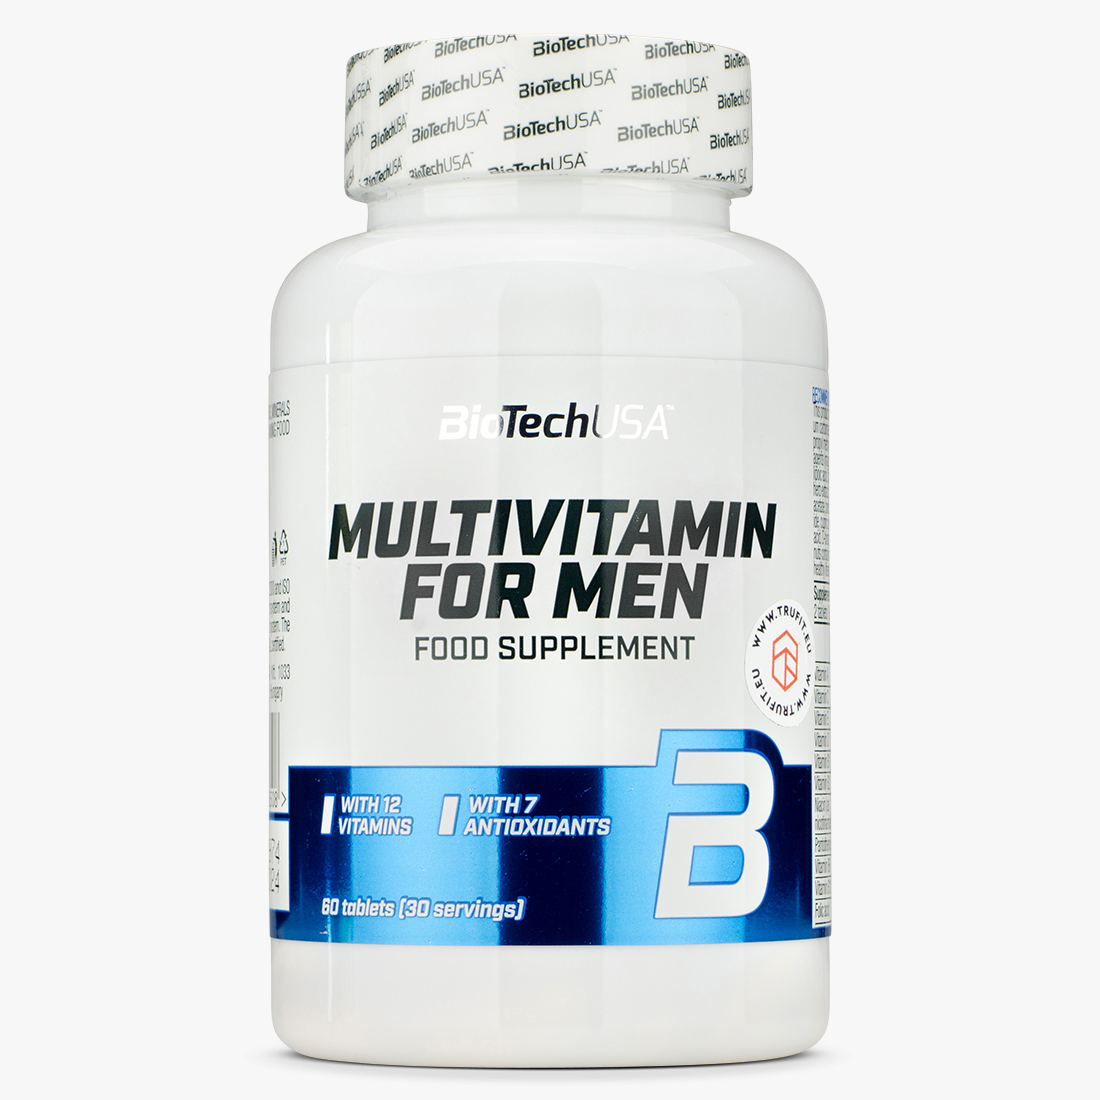 https://valpharm24.com/count/bodybuildingLike An Expert. Follow These 5 Steps To Get There